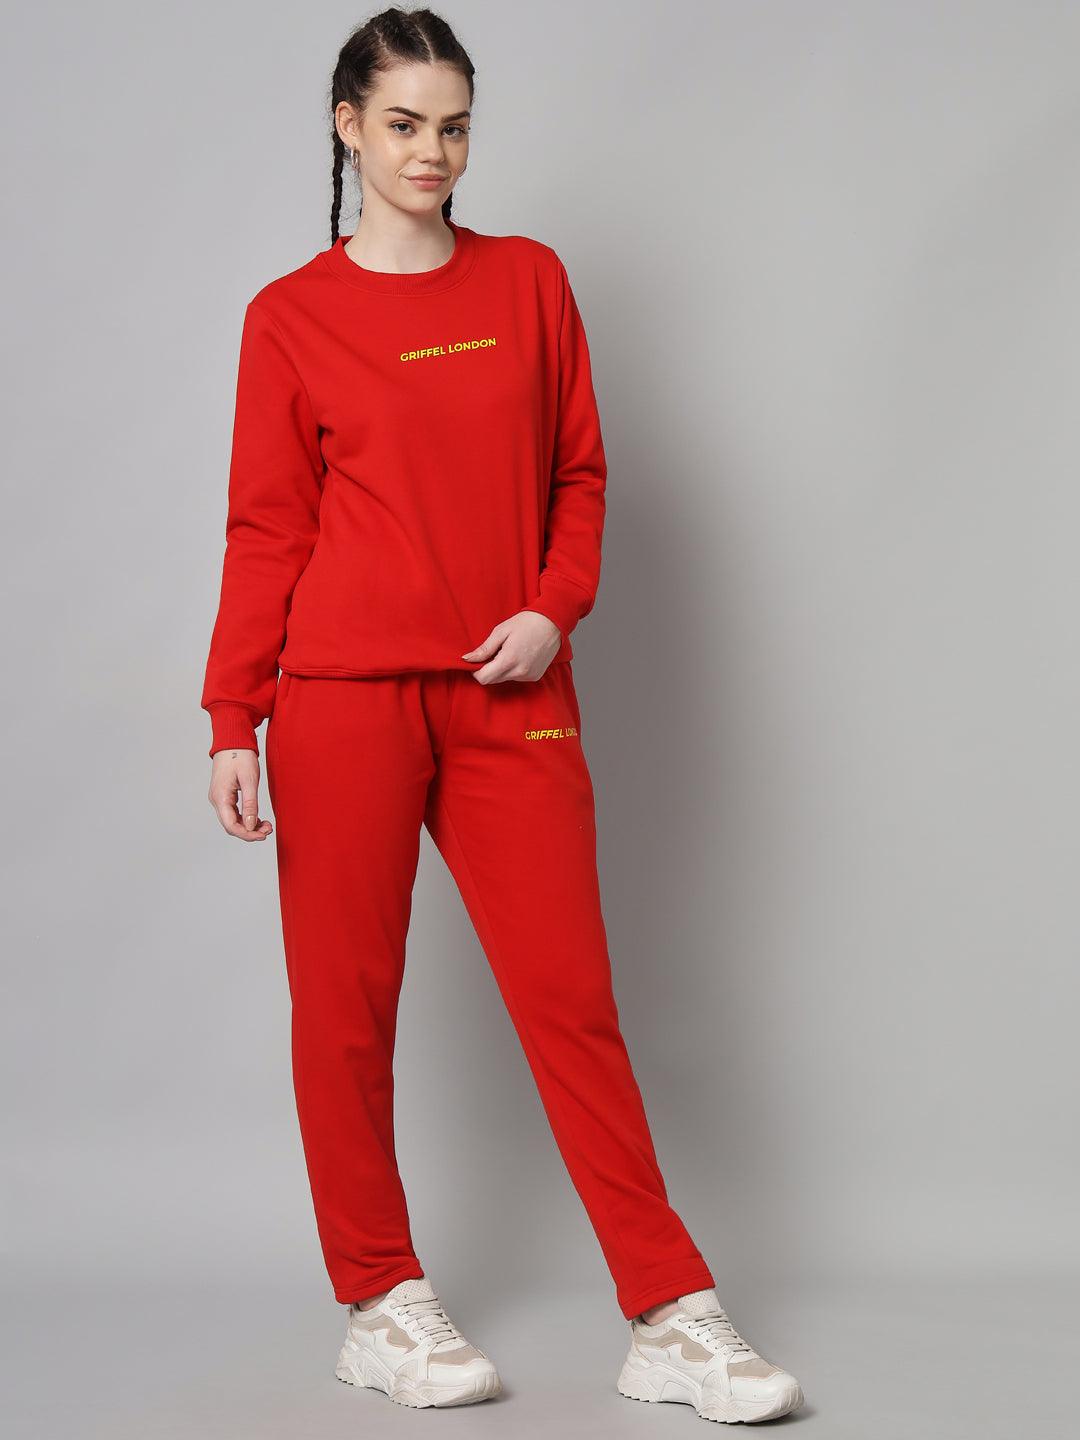 Griffel Women Solid Fleece Basic Round Neck Sweatshirt and Joggers Full set Red Tracksuit - griffel